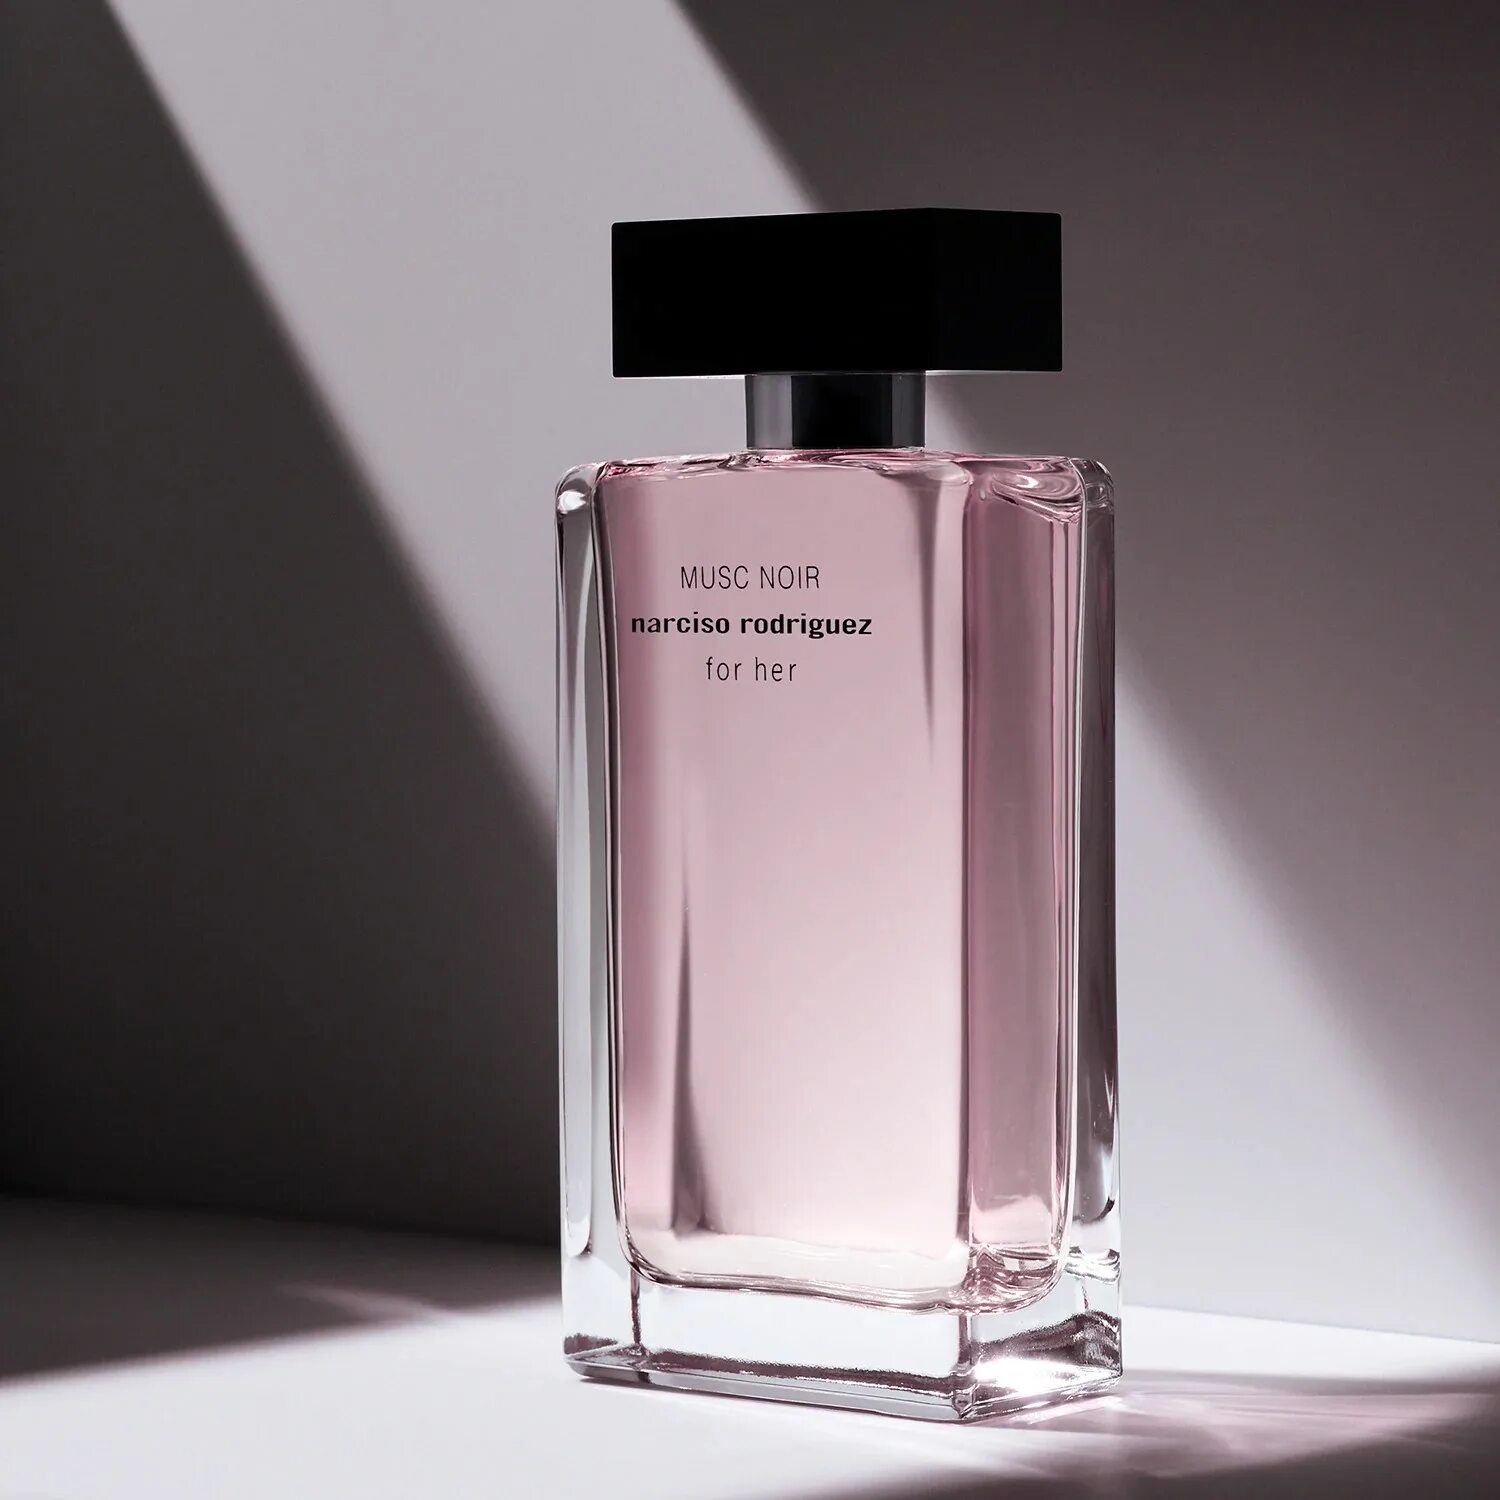 Narciso Rodriguez for her Musk. Musk Noir for her Narciso Rodriguez. Narciso Rodriguez Musk Noir. Narciso Rodriguez Musc. Narciso rodriguez musc купить